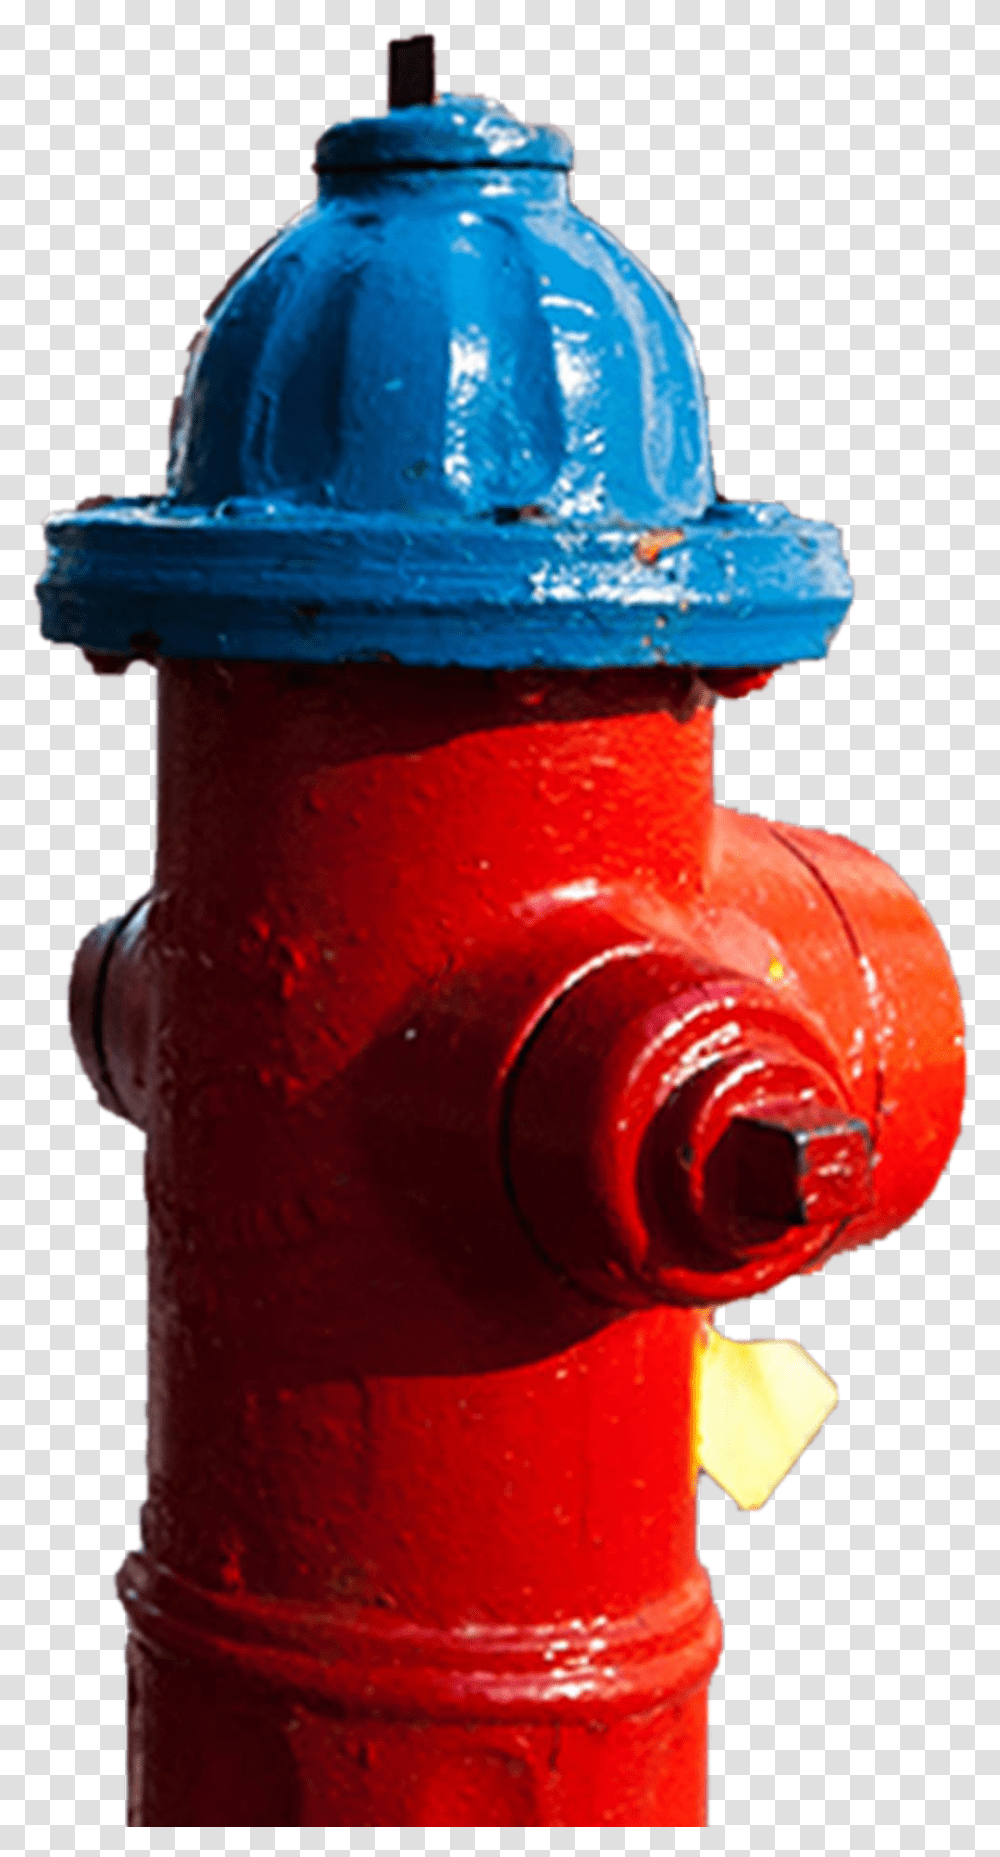 Red Fire Hydrant Background Image Play Hidrante De Bomberos Transparent Png